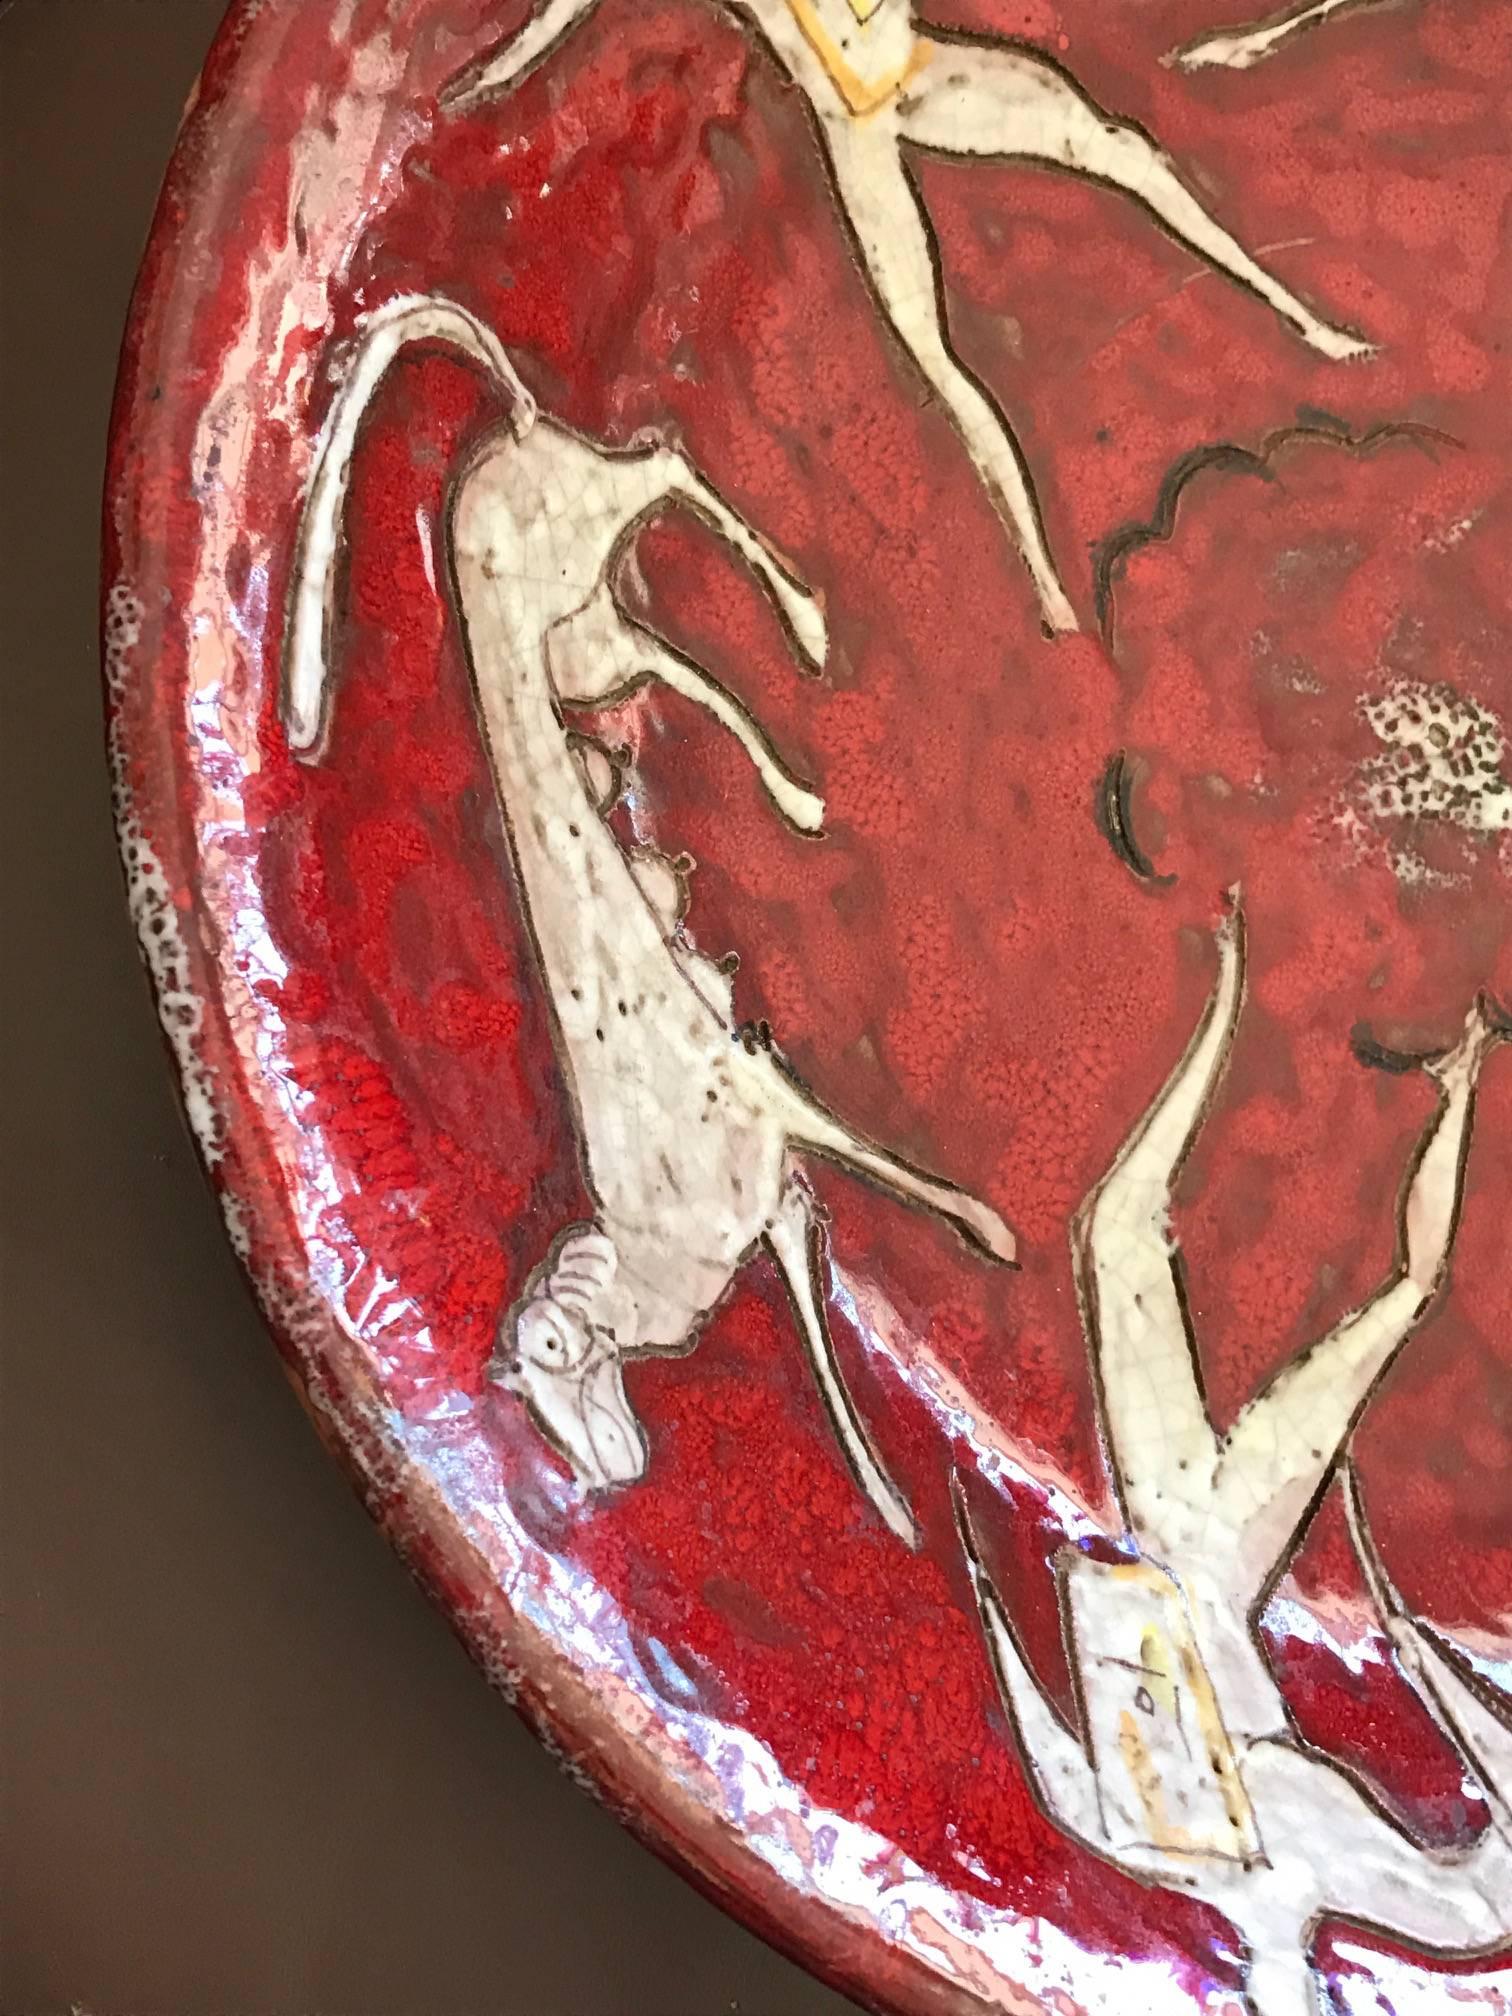 A fantastic and rare ceramic charger by Eugenio Pattarino. Vibrant red color and Classic Italian Mid-Century style is represented very well in this piece. Eugenio Pattarino was born in 1885 and passed away in 1971. He was a master sculptor and model